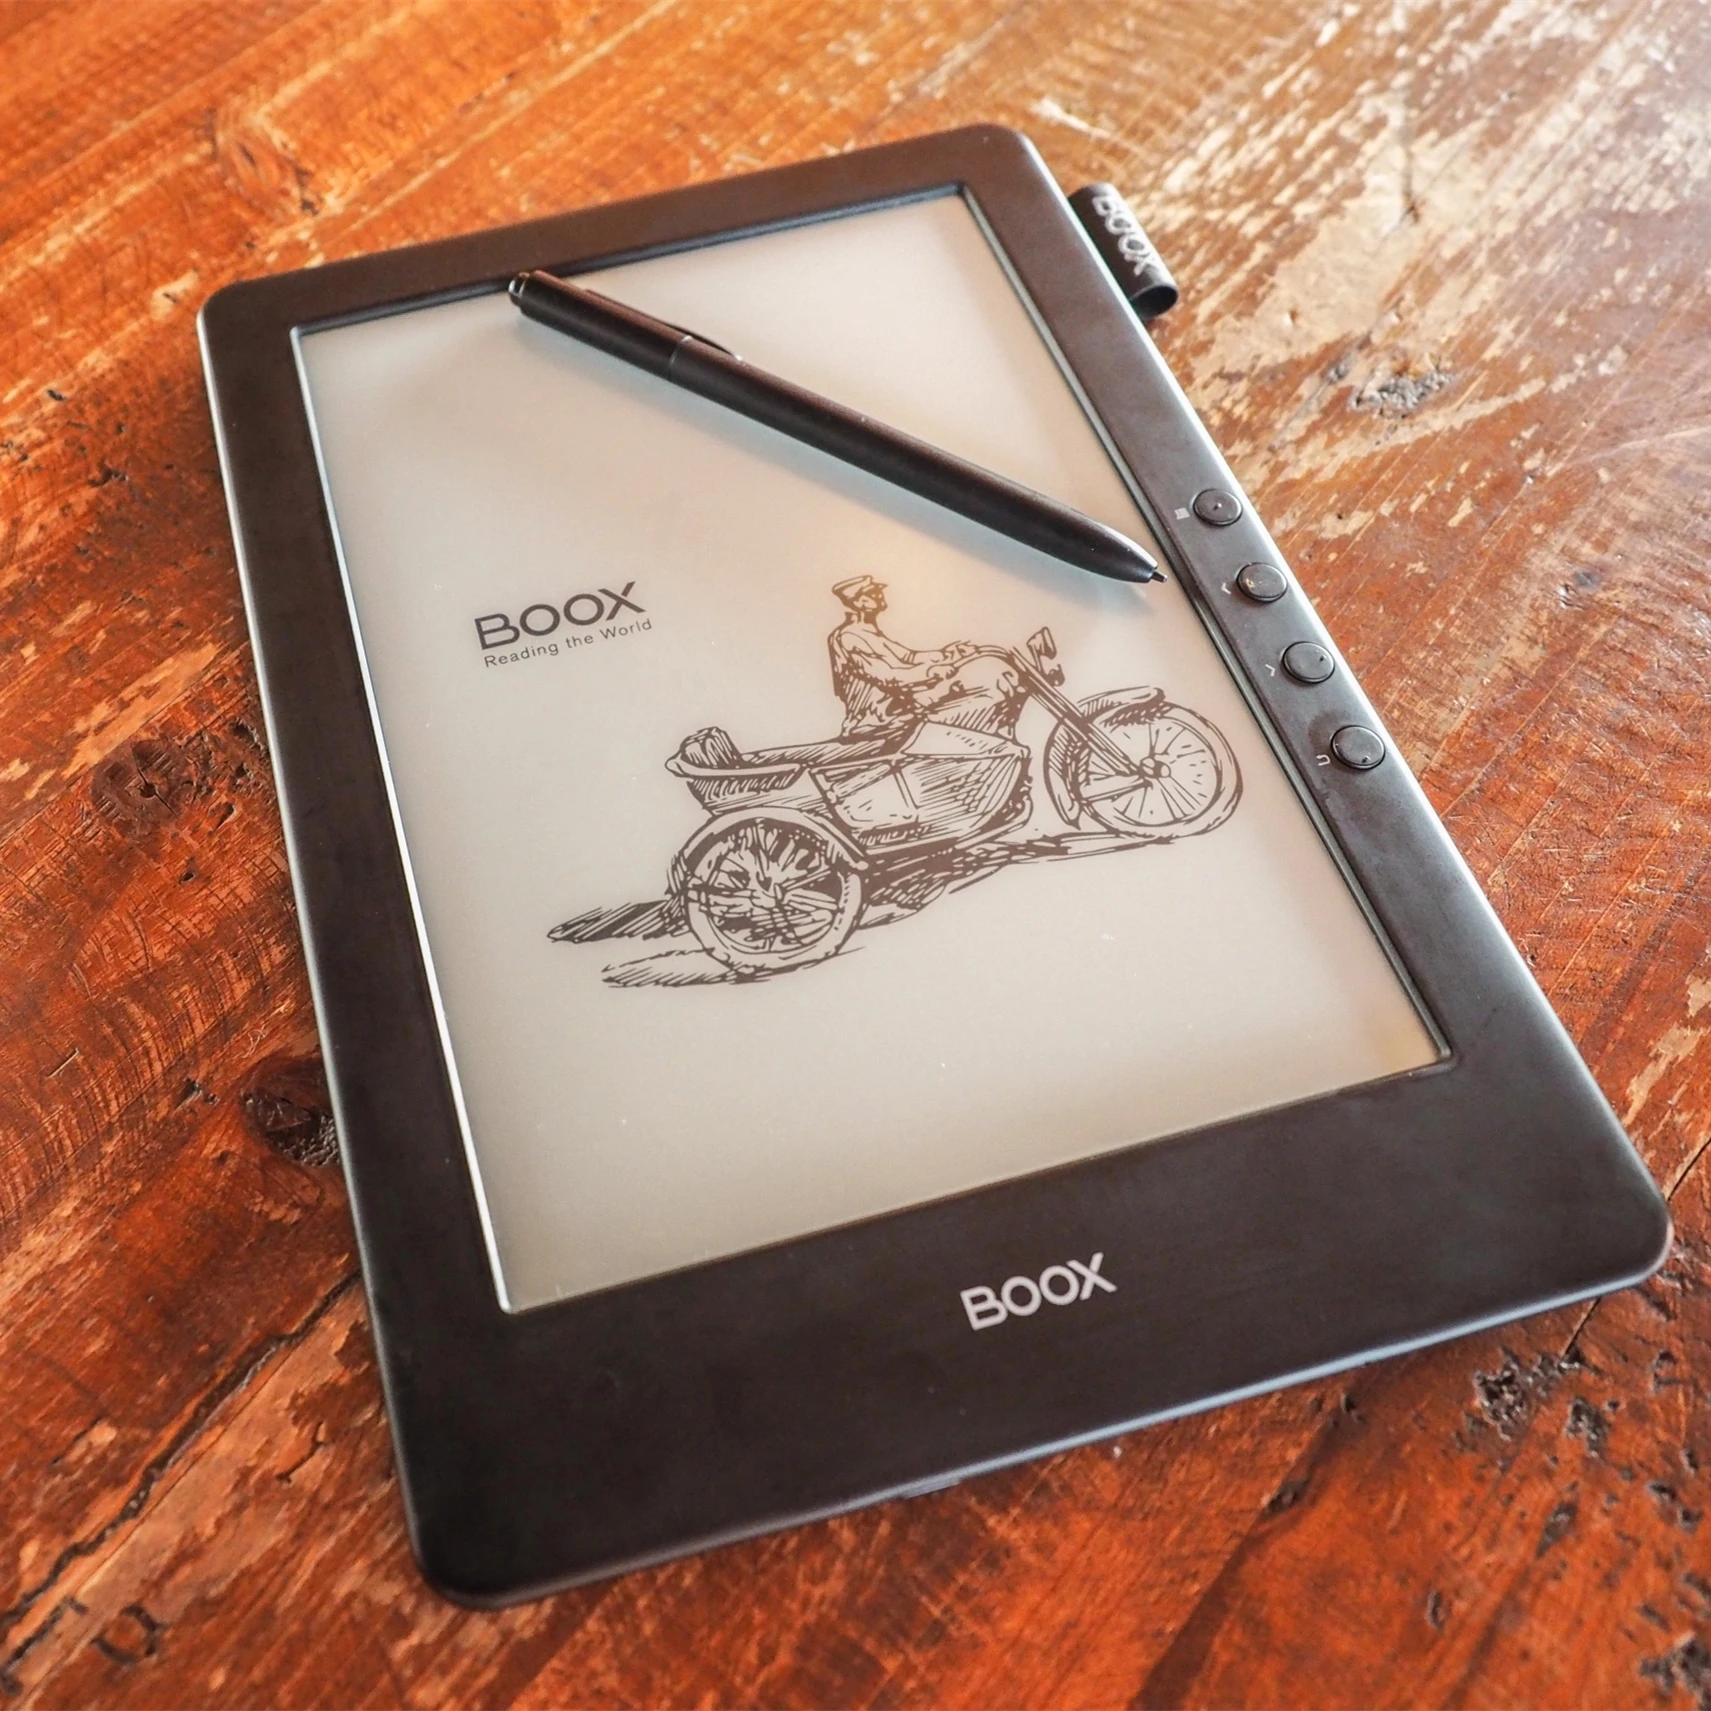 Products :: ONYX BOOX electronic books